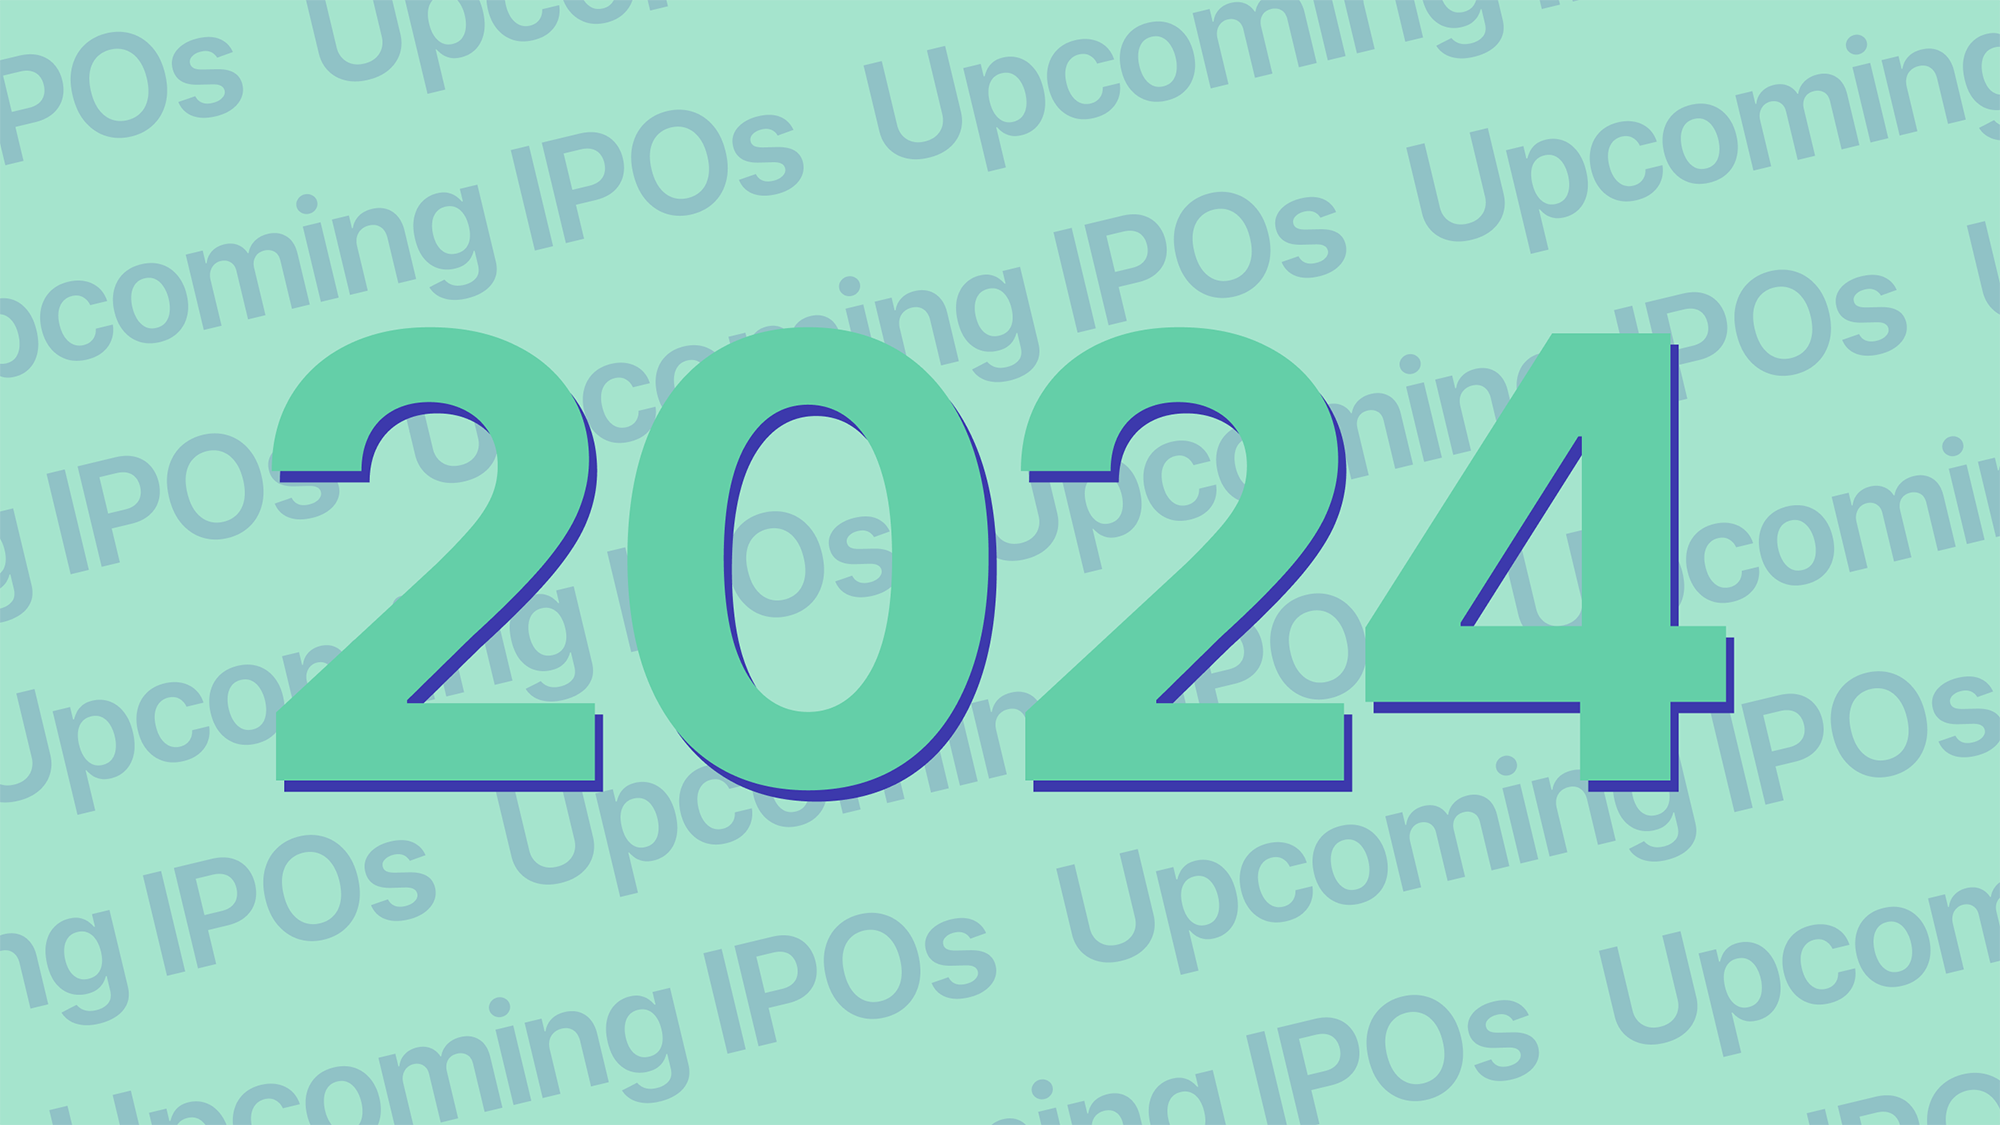 og-image Discover the upcoming and most anticipated IPOs in 2024